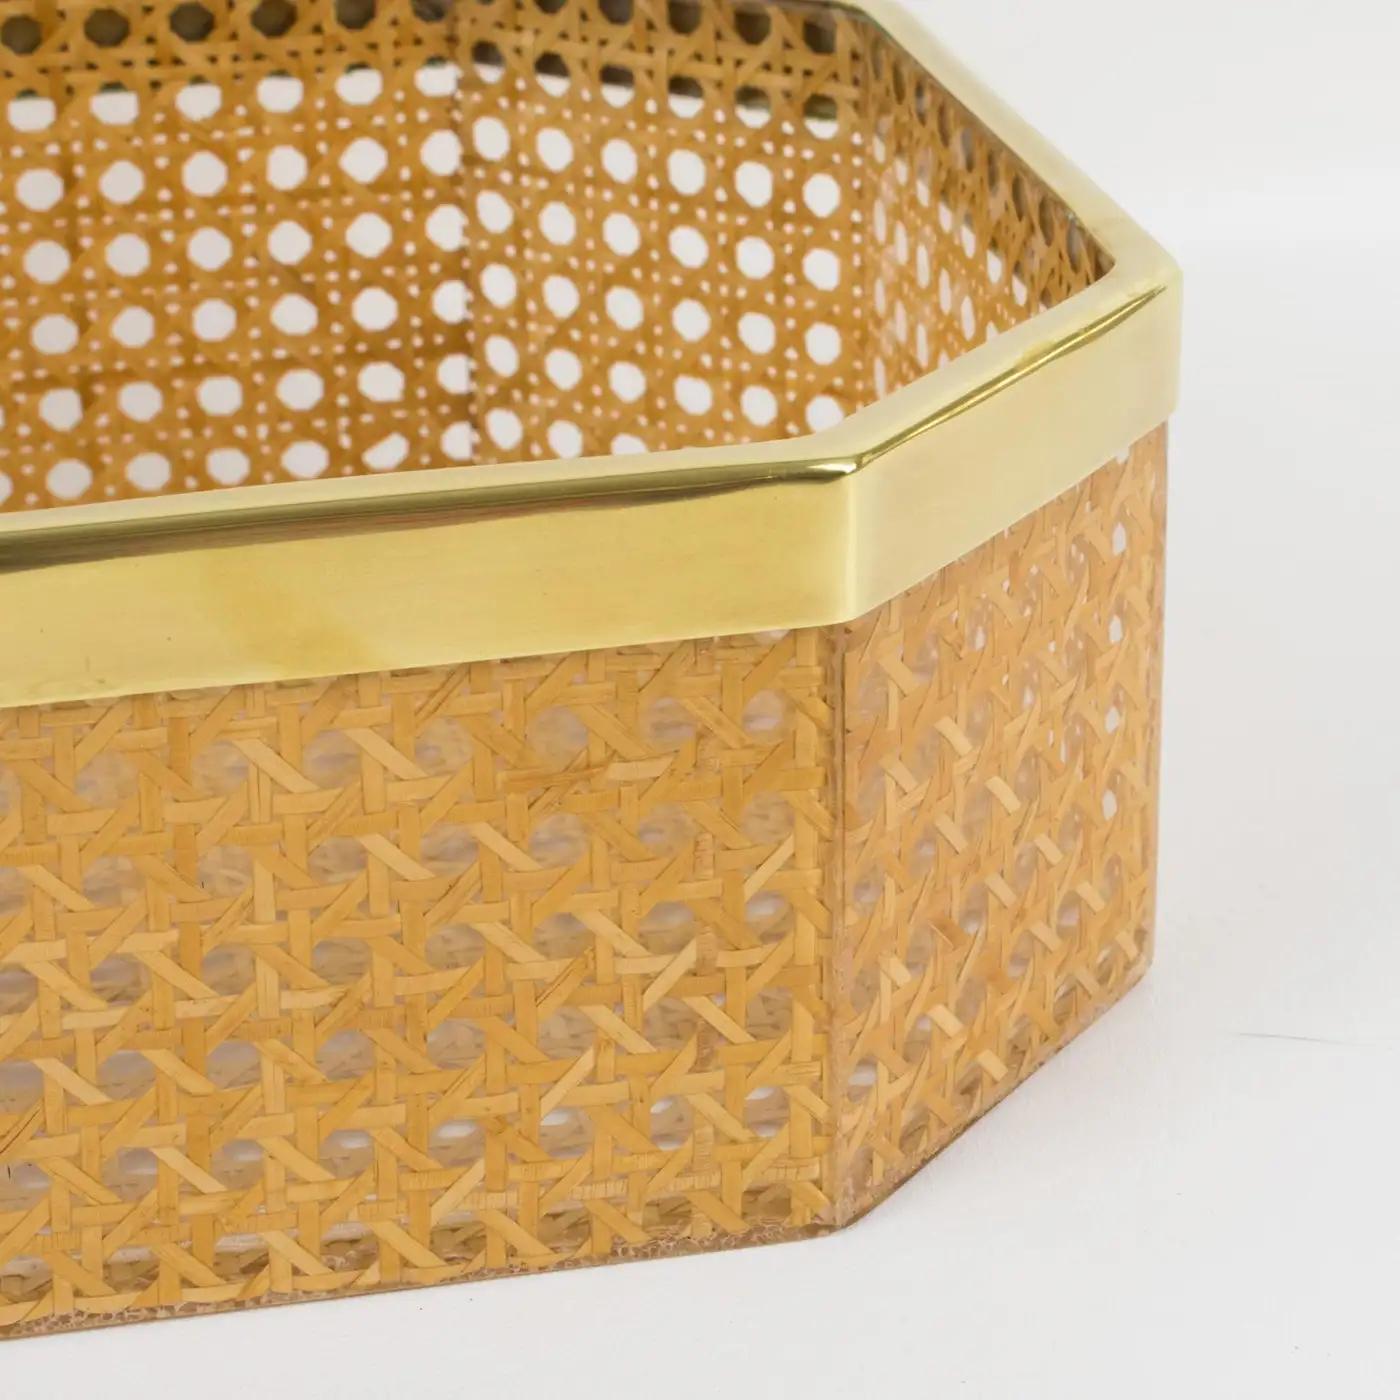 Christian Dior Home Lucite and Rattan Basket Bowl Centerpiece, 1970s For Sale 1